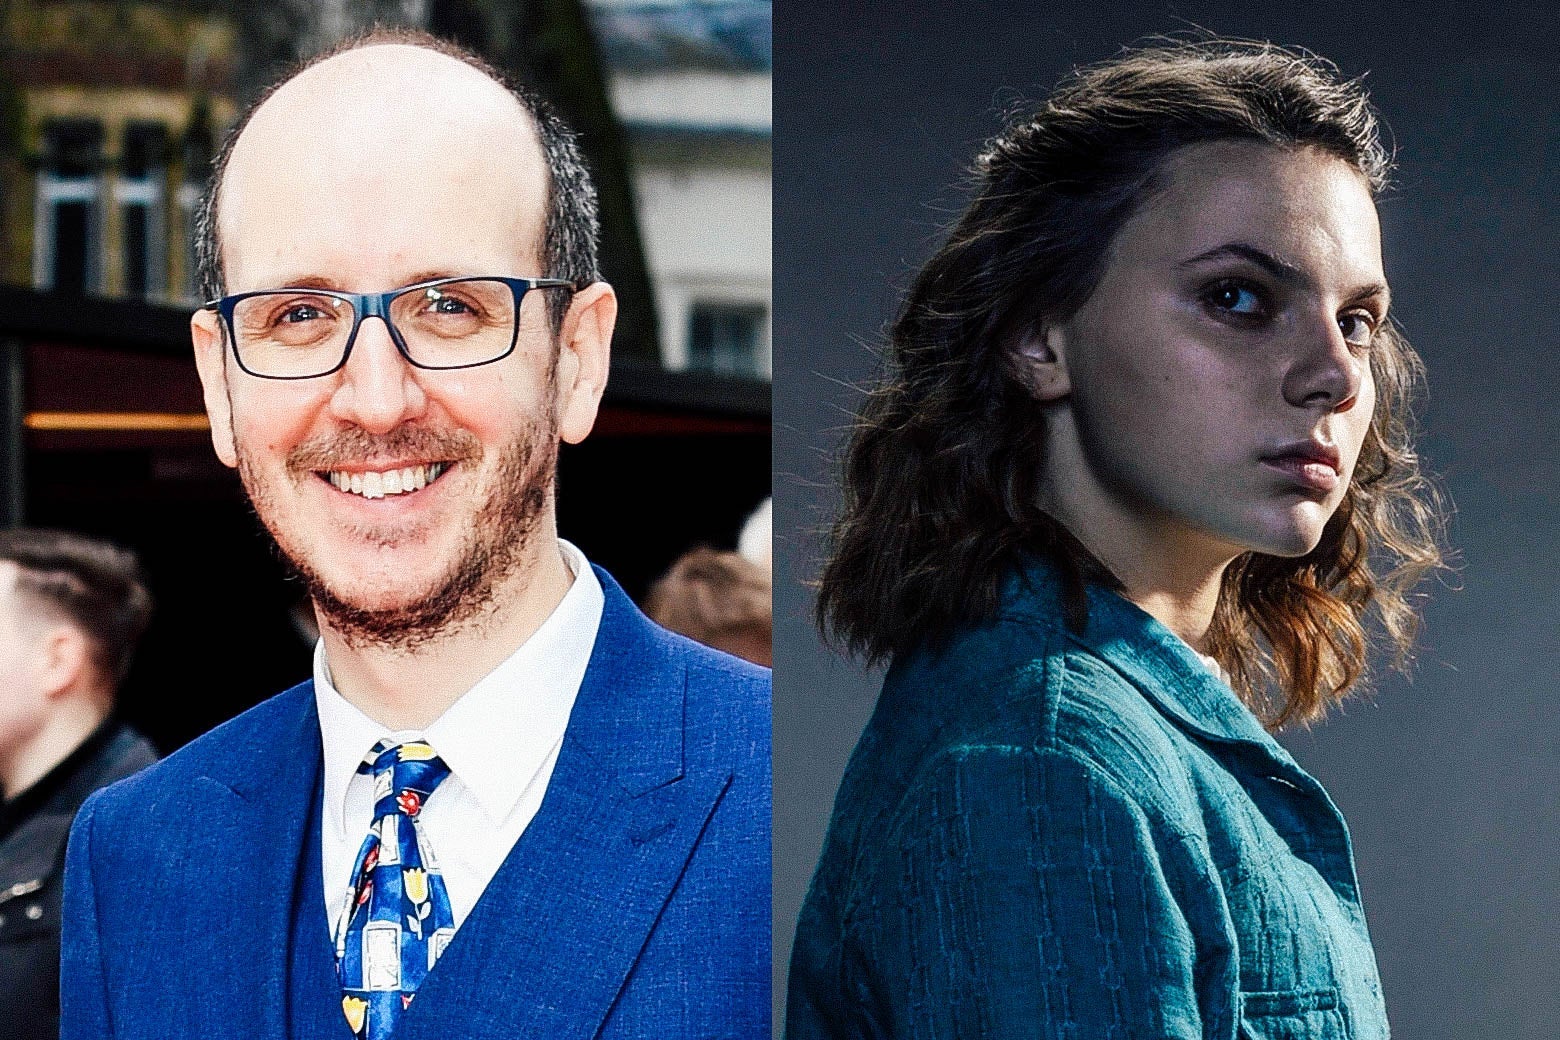 Jack Thorne and Lyra from the show His Dark Materials.